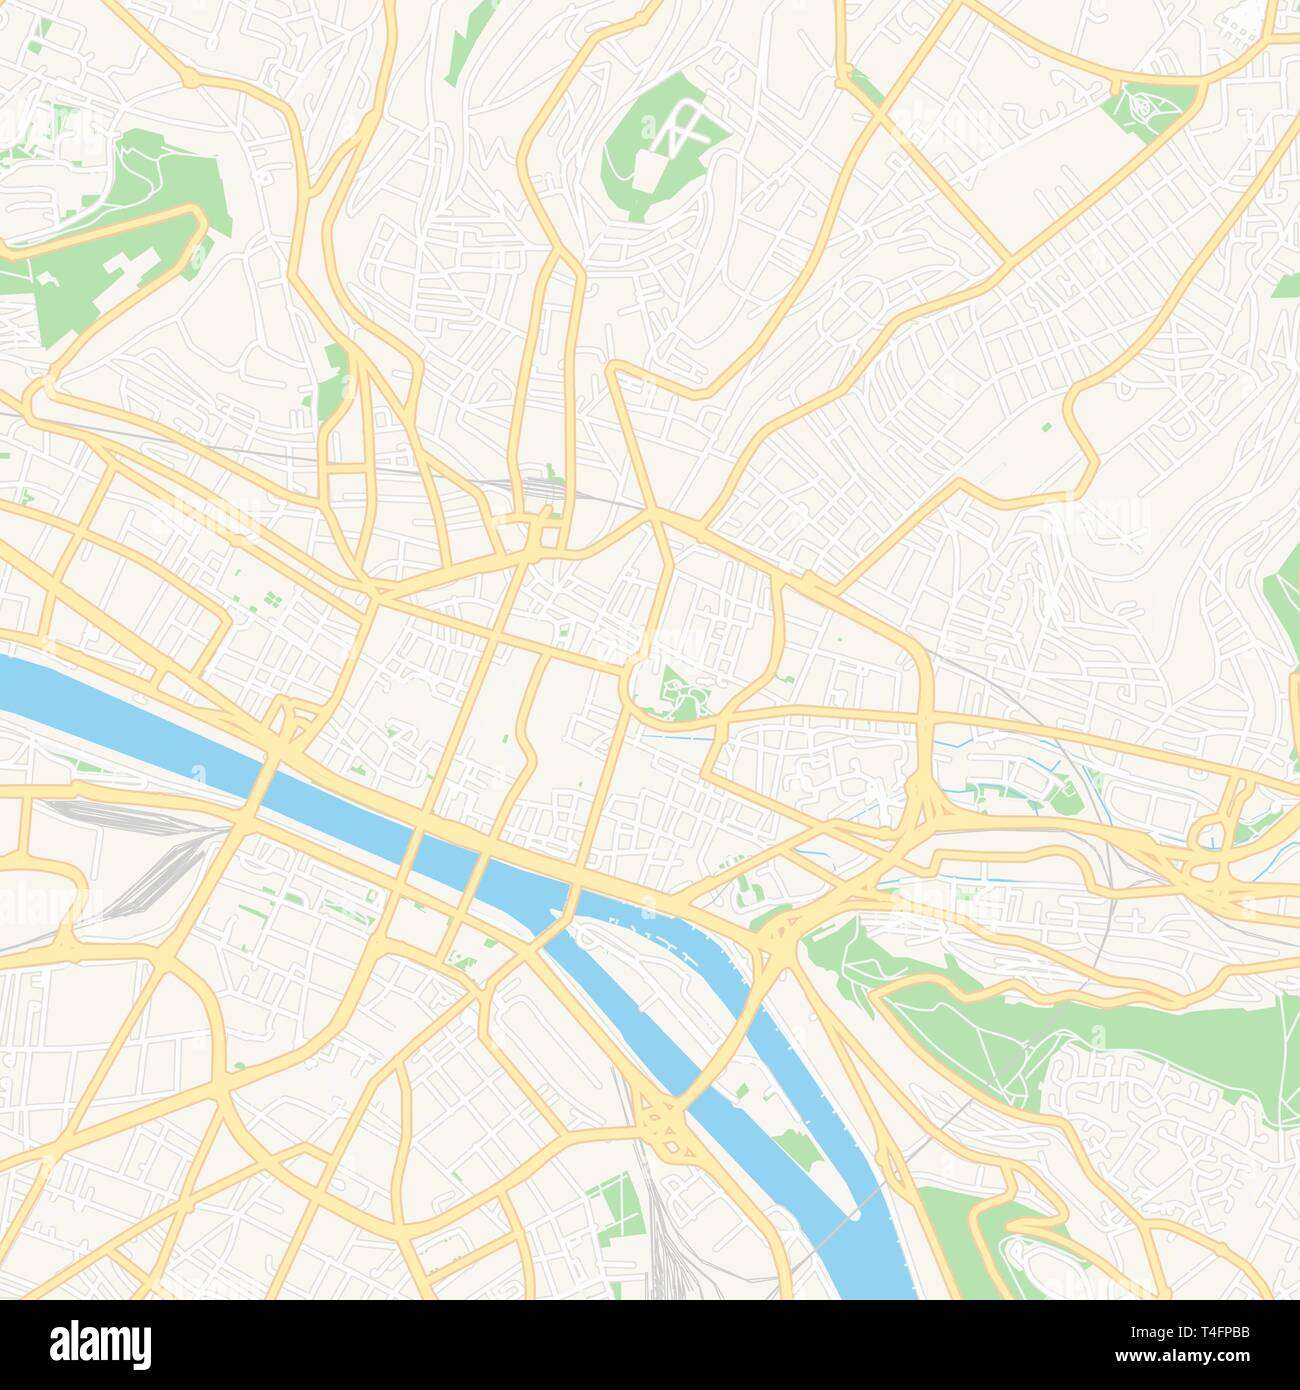 Printable map of Rouen, France with main and secondary roads and larger railways. This map is carefully designed for routing and placing individual da Stock Vector